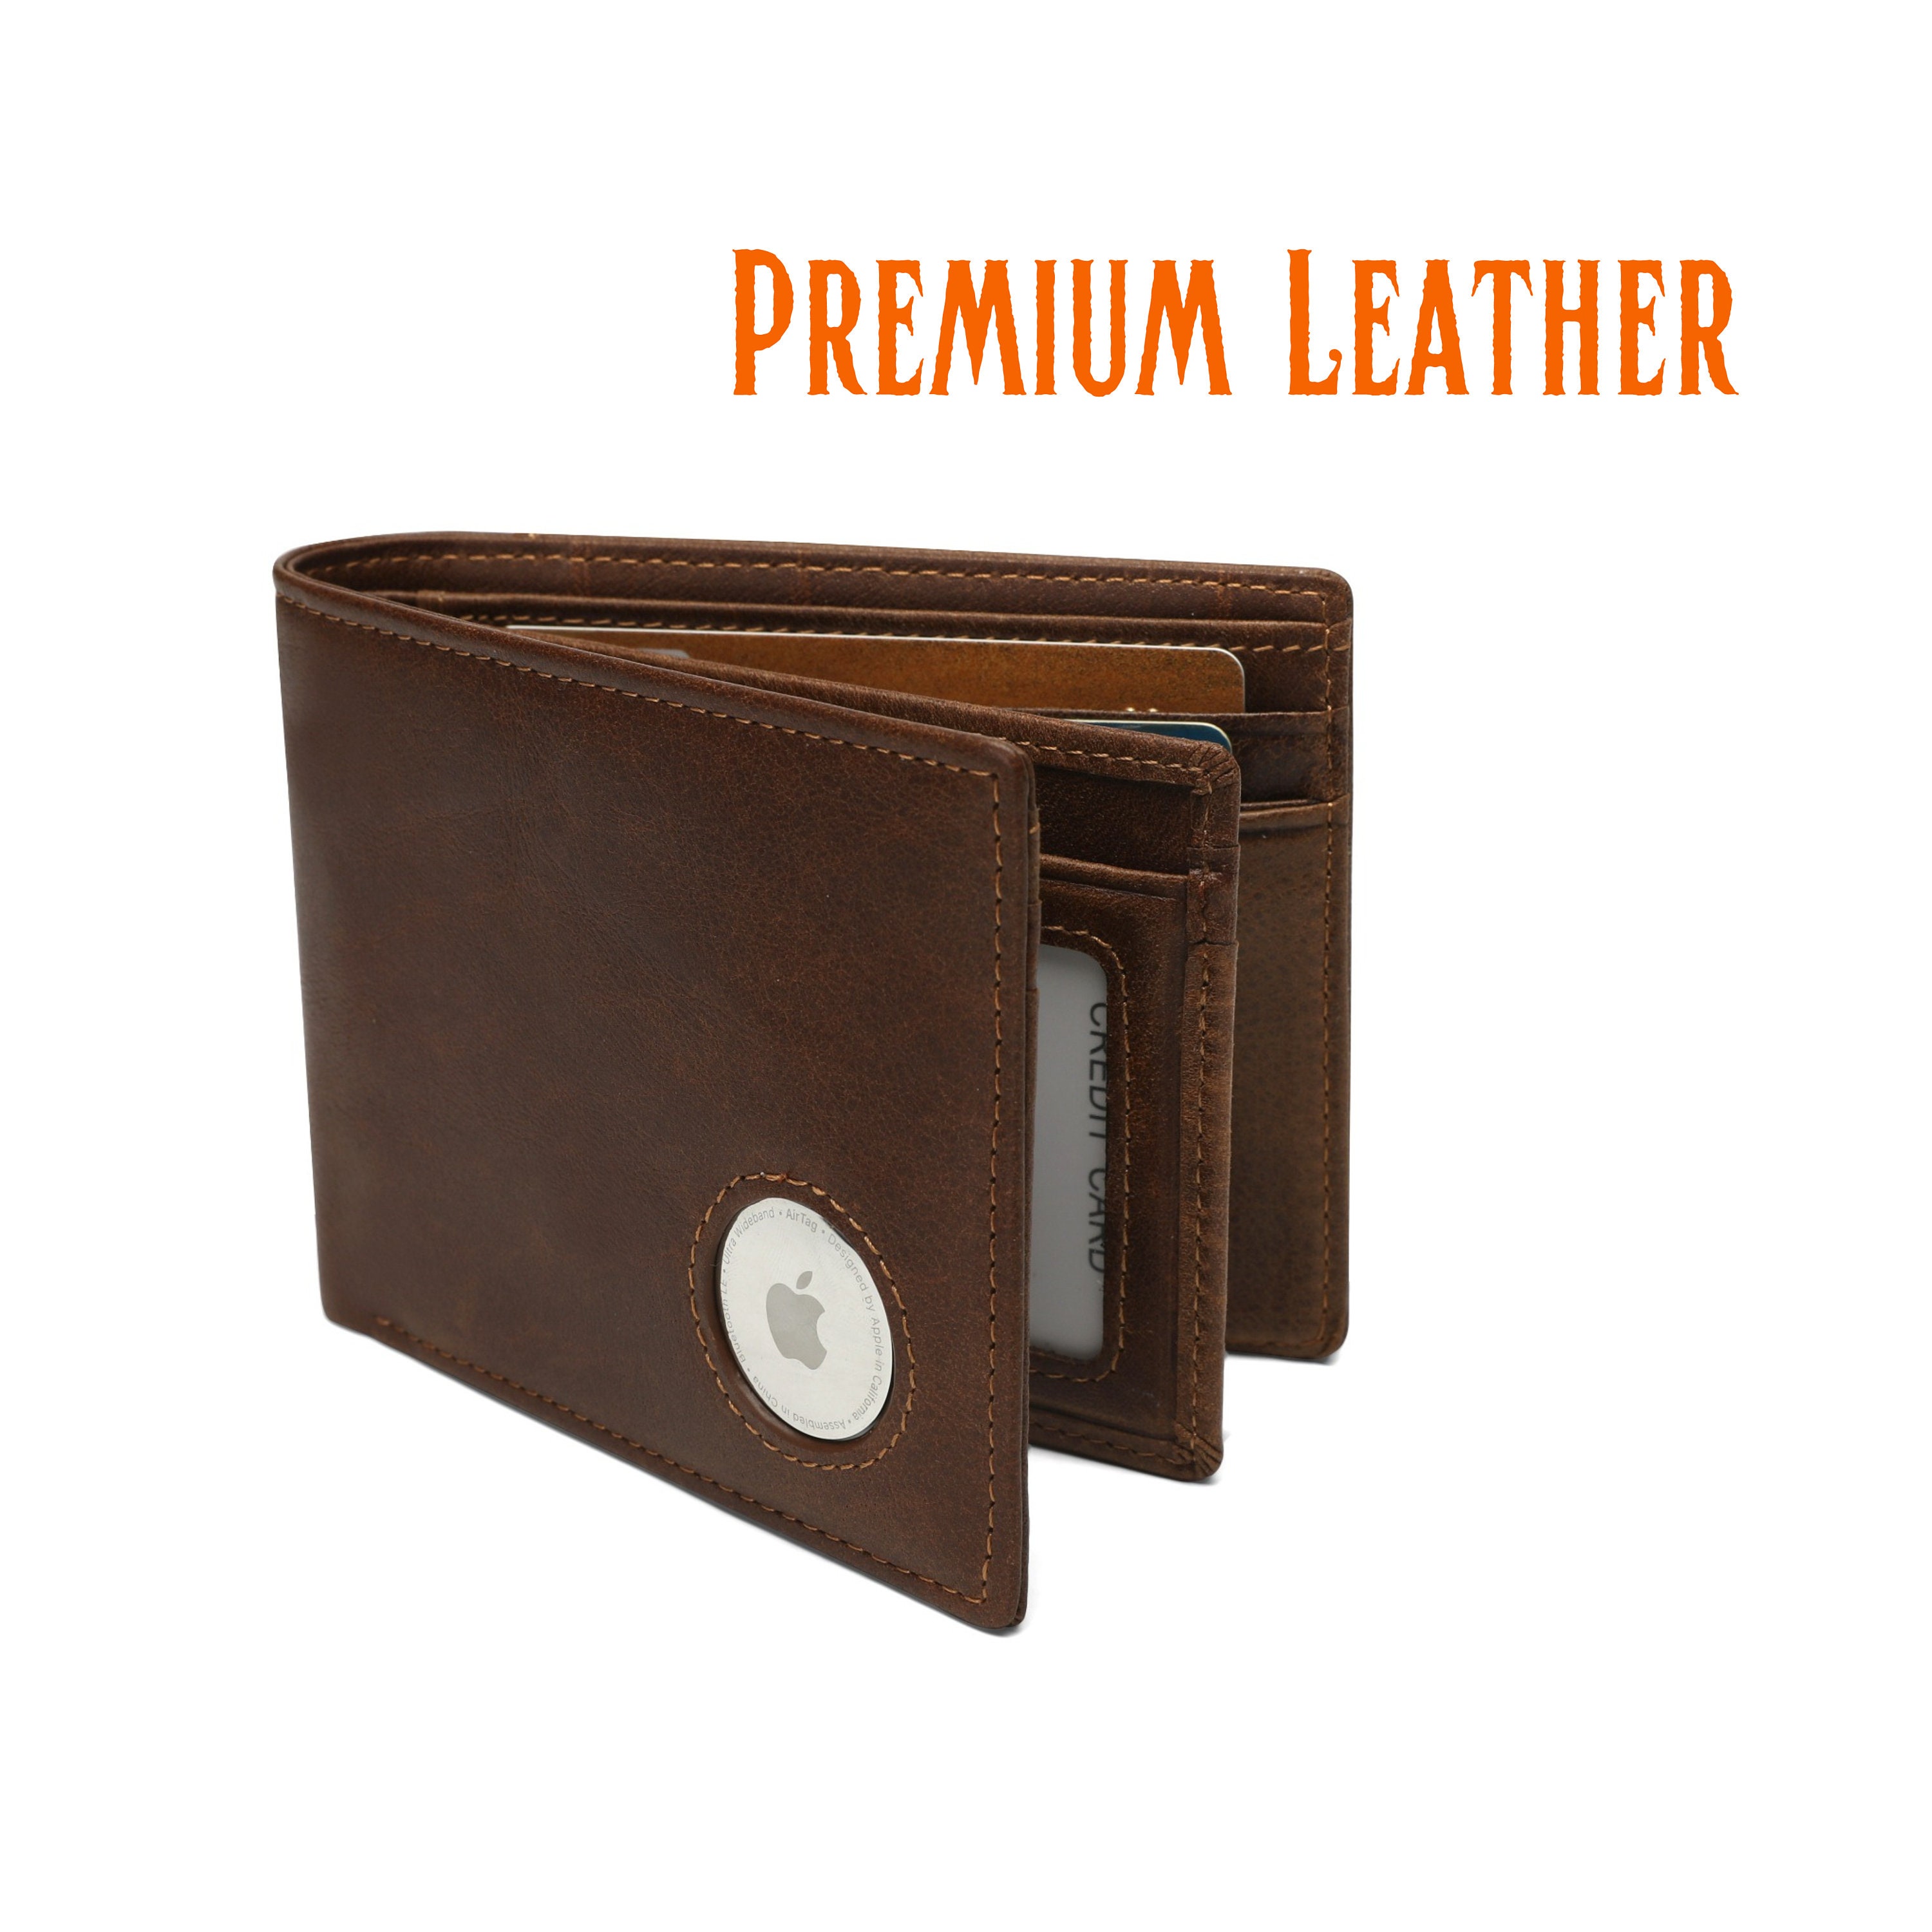 Source Boshiho Custom Pocket leather wallet airtag Credit card